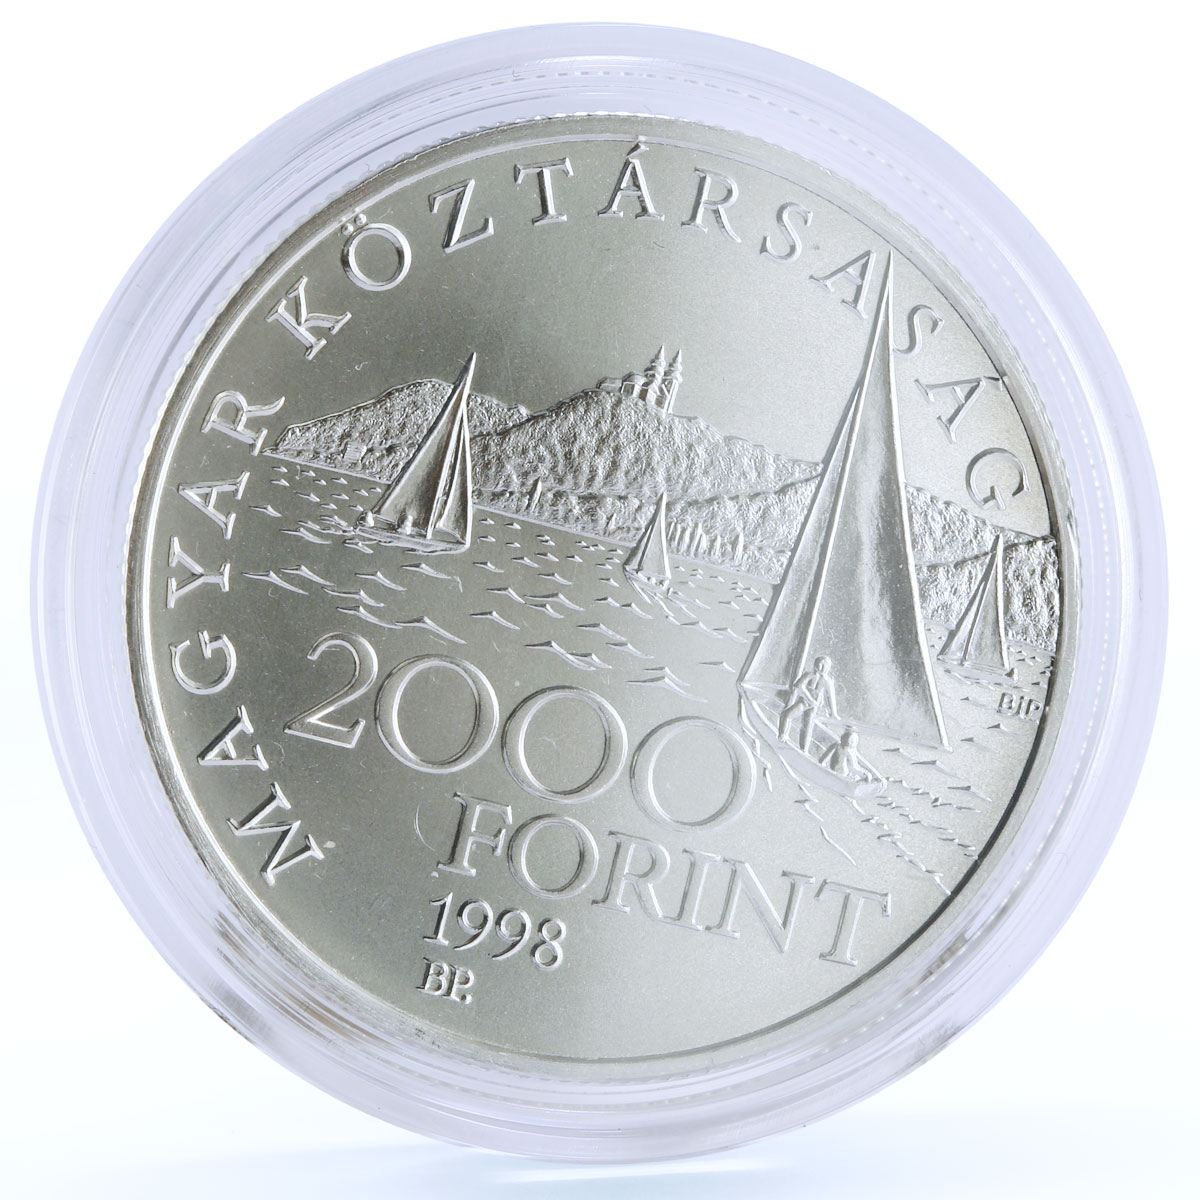 Hungary 2000 forint Old Ship Phoenix Clipper Boat Seafaring silver coin 1998